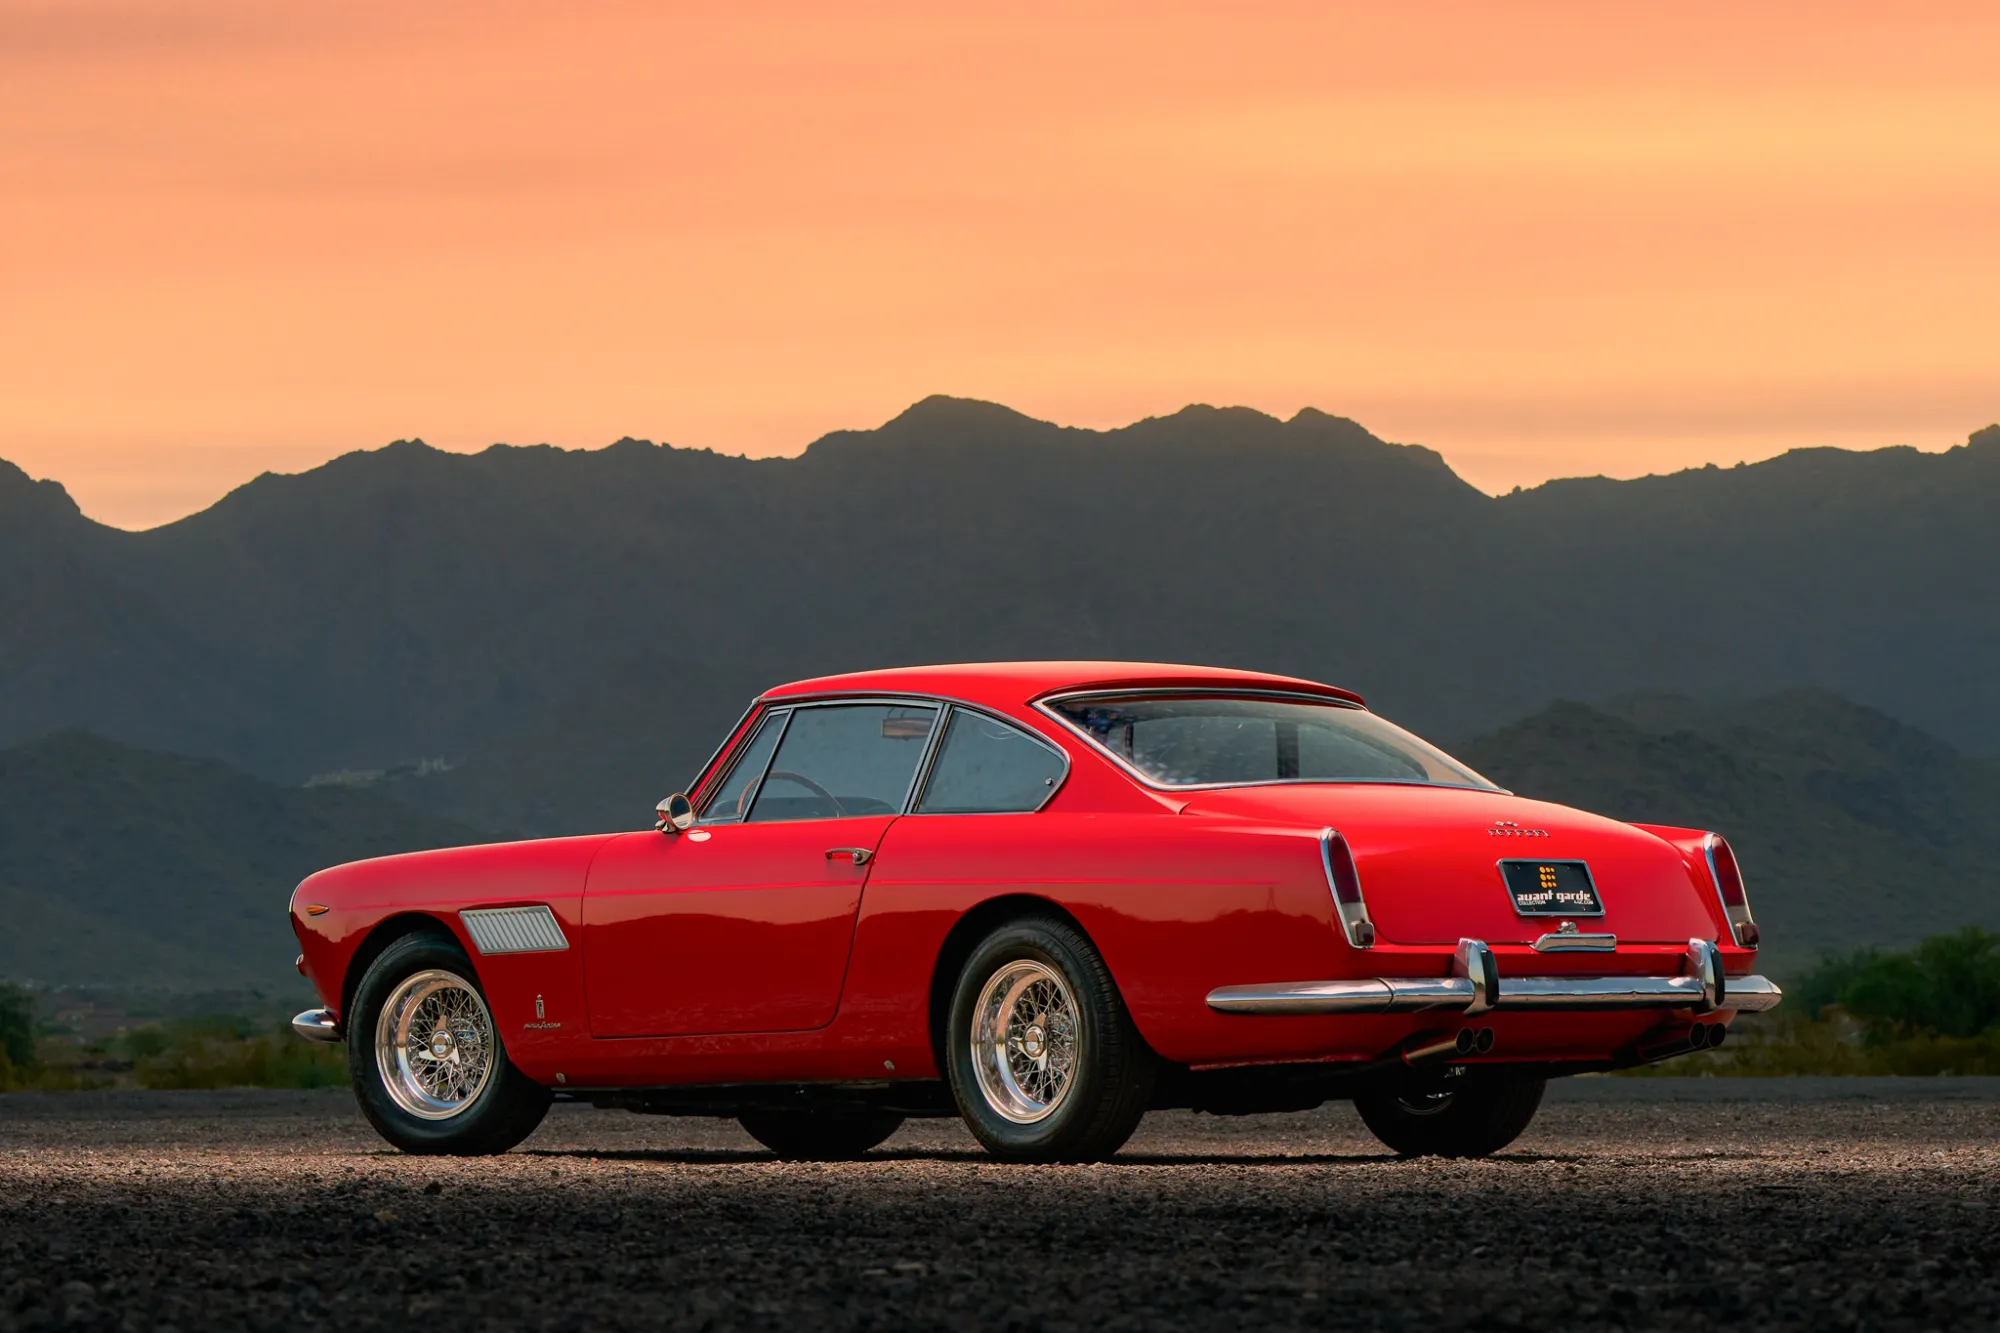 handpicked, sports, american, news, newsletter, highlights, muscle, client, classic, modern classic, europe, features, luxury, trucks, celebrity, off-road, german, 1964 ferrari 330 america is selling on bring a trailer will have you seeing red